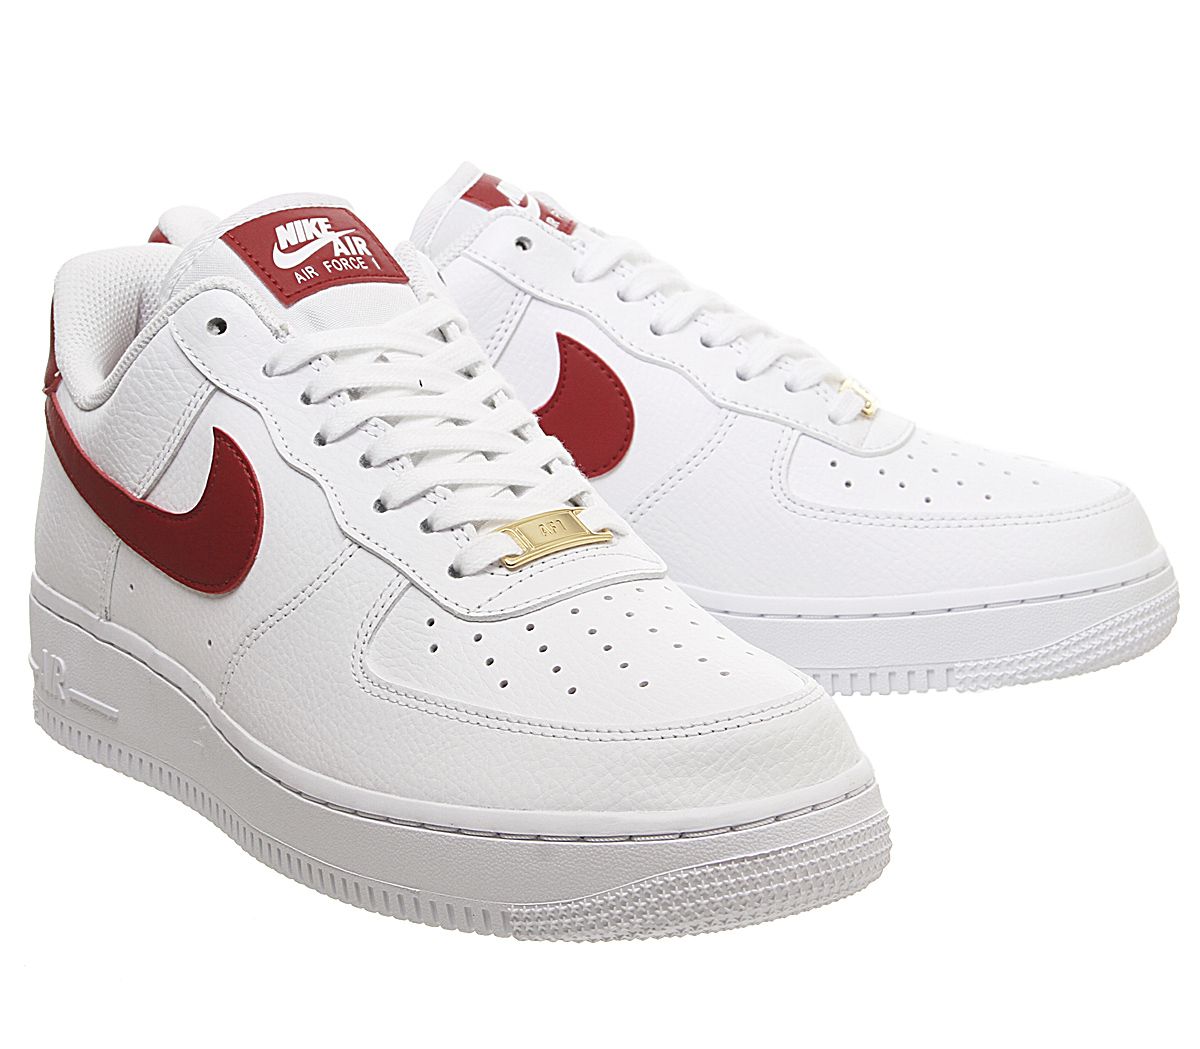 Nike Air Force 1 07 Trainers White Gym Red Metallic Gold - Hers trainers